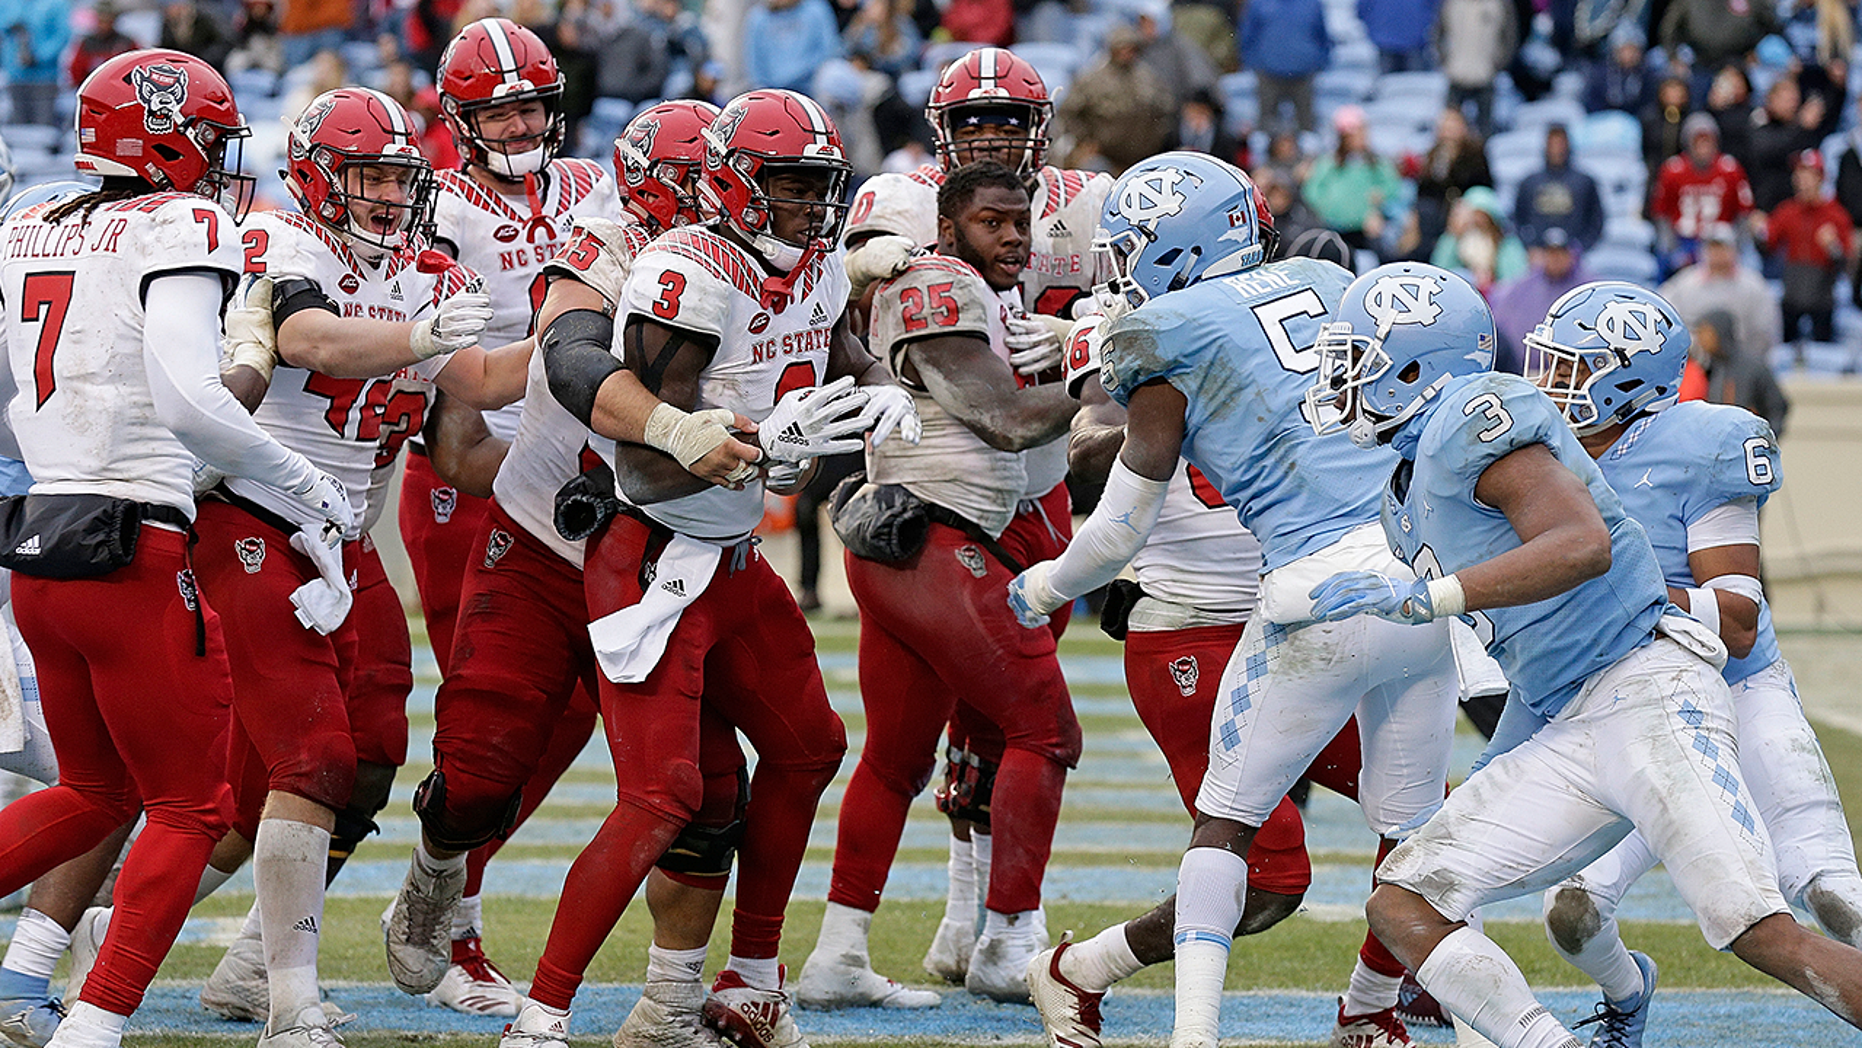 North Carolina, NC State football game ends in brawl after overtime win